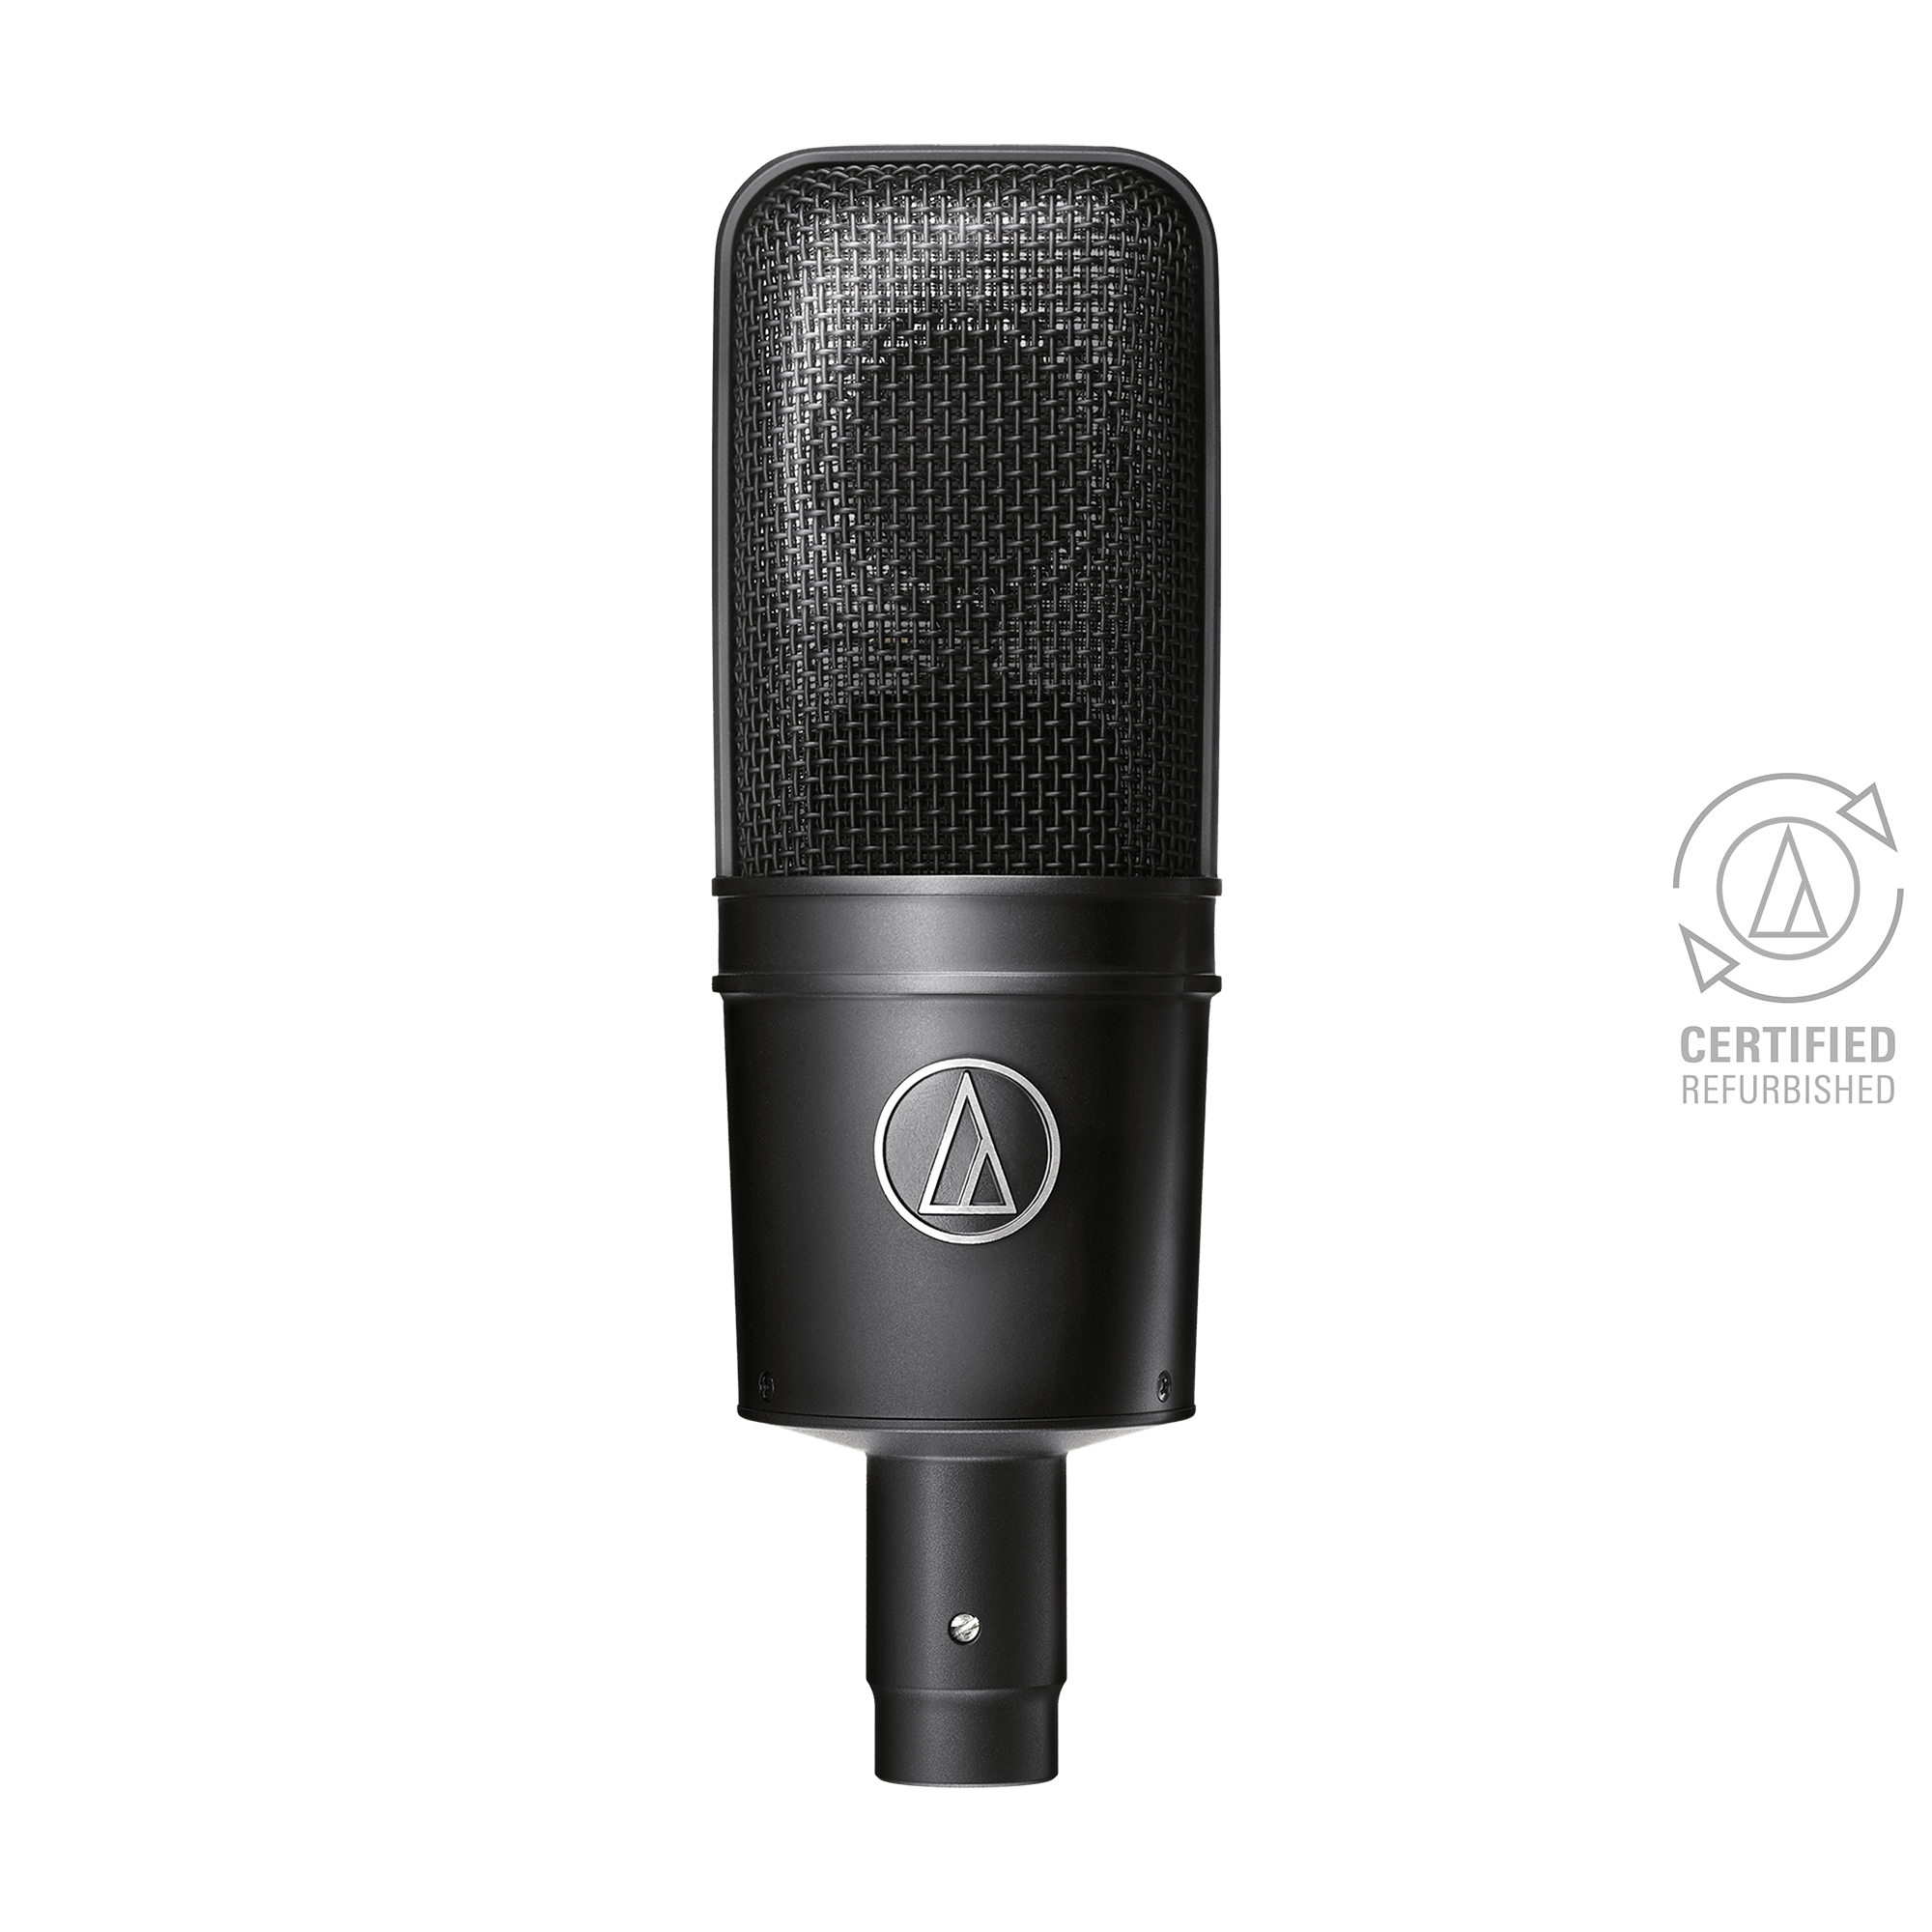 AT4040-CR Cardioid Condenser Microphone